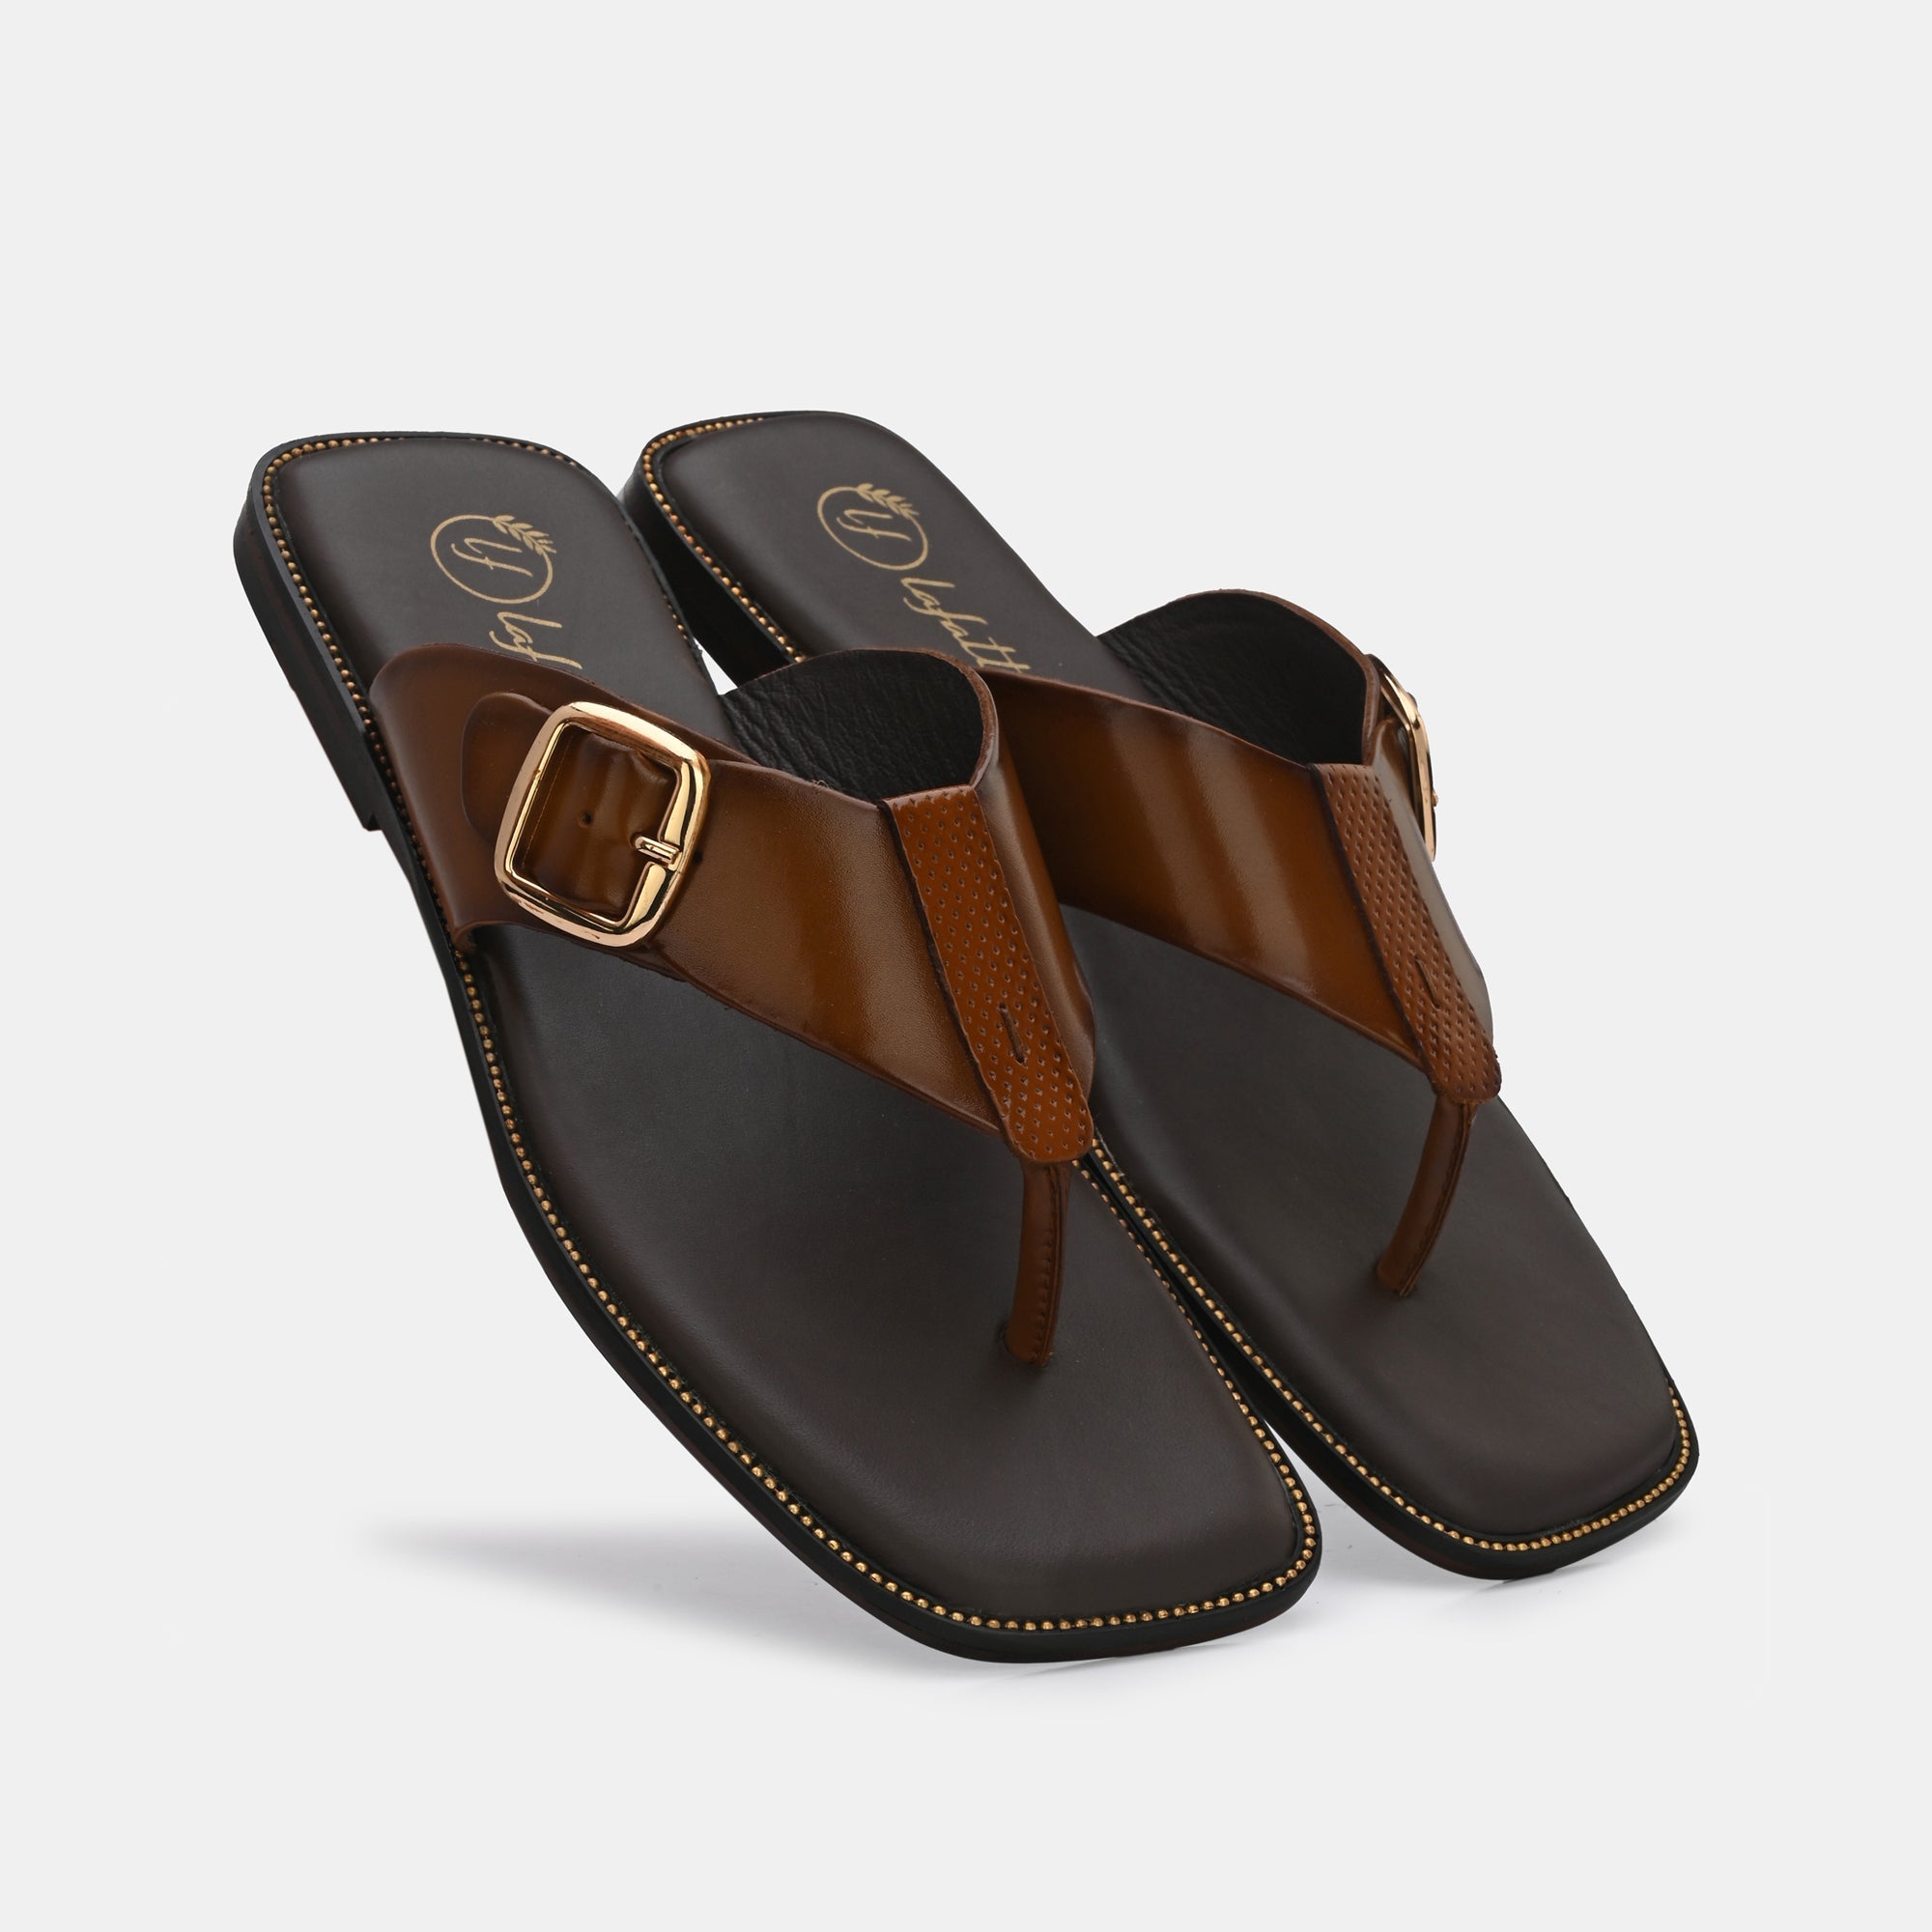 Tan Buckled Slippers by Lafattio